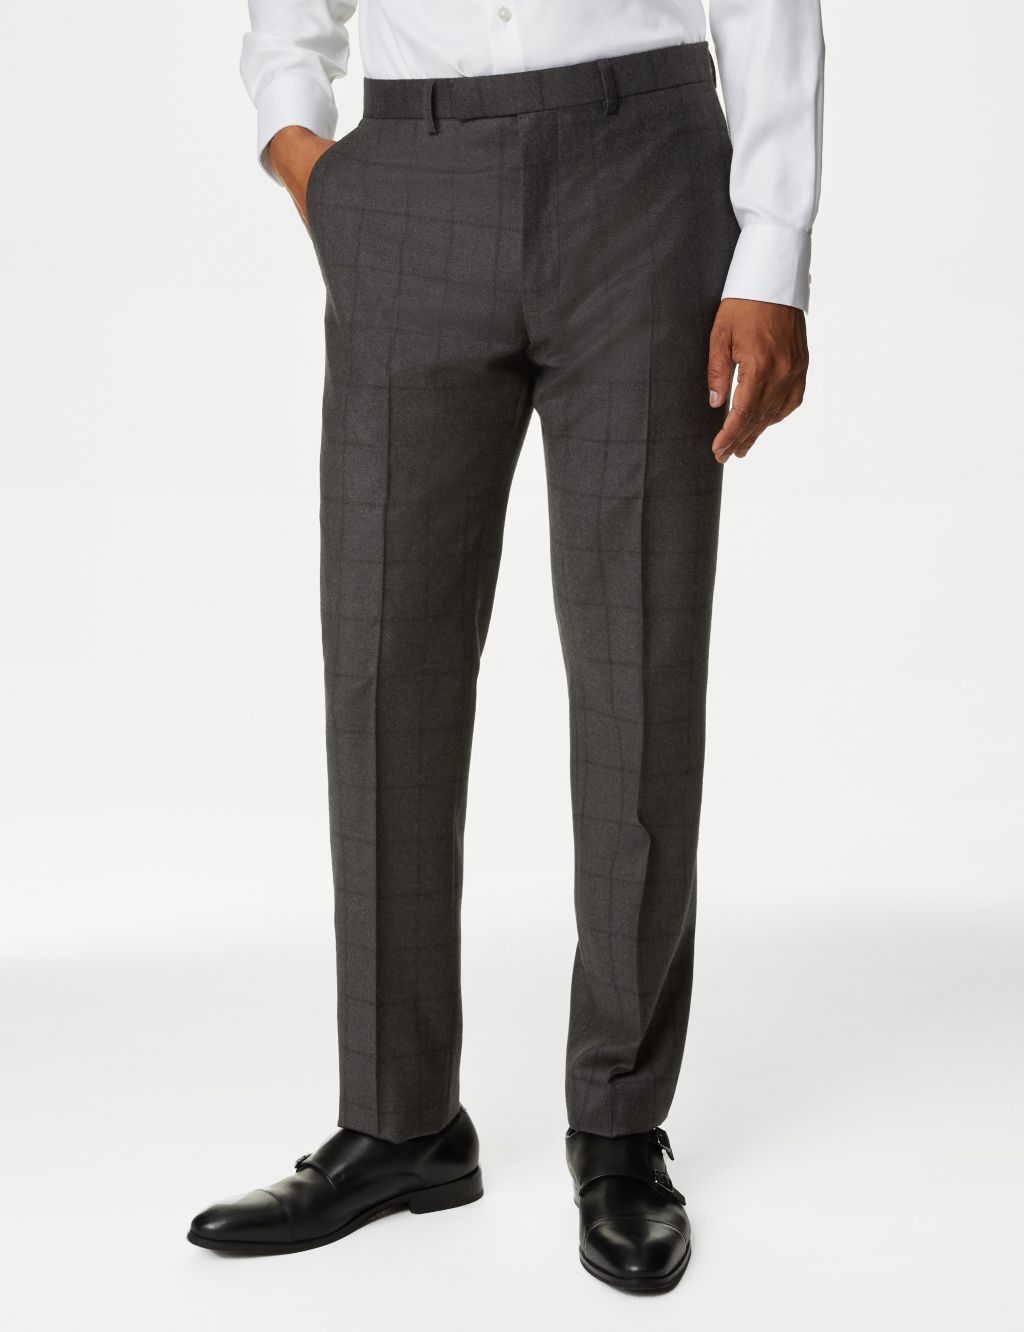 Slim Fit Pure Wool Check Suit image 4